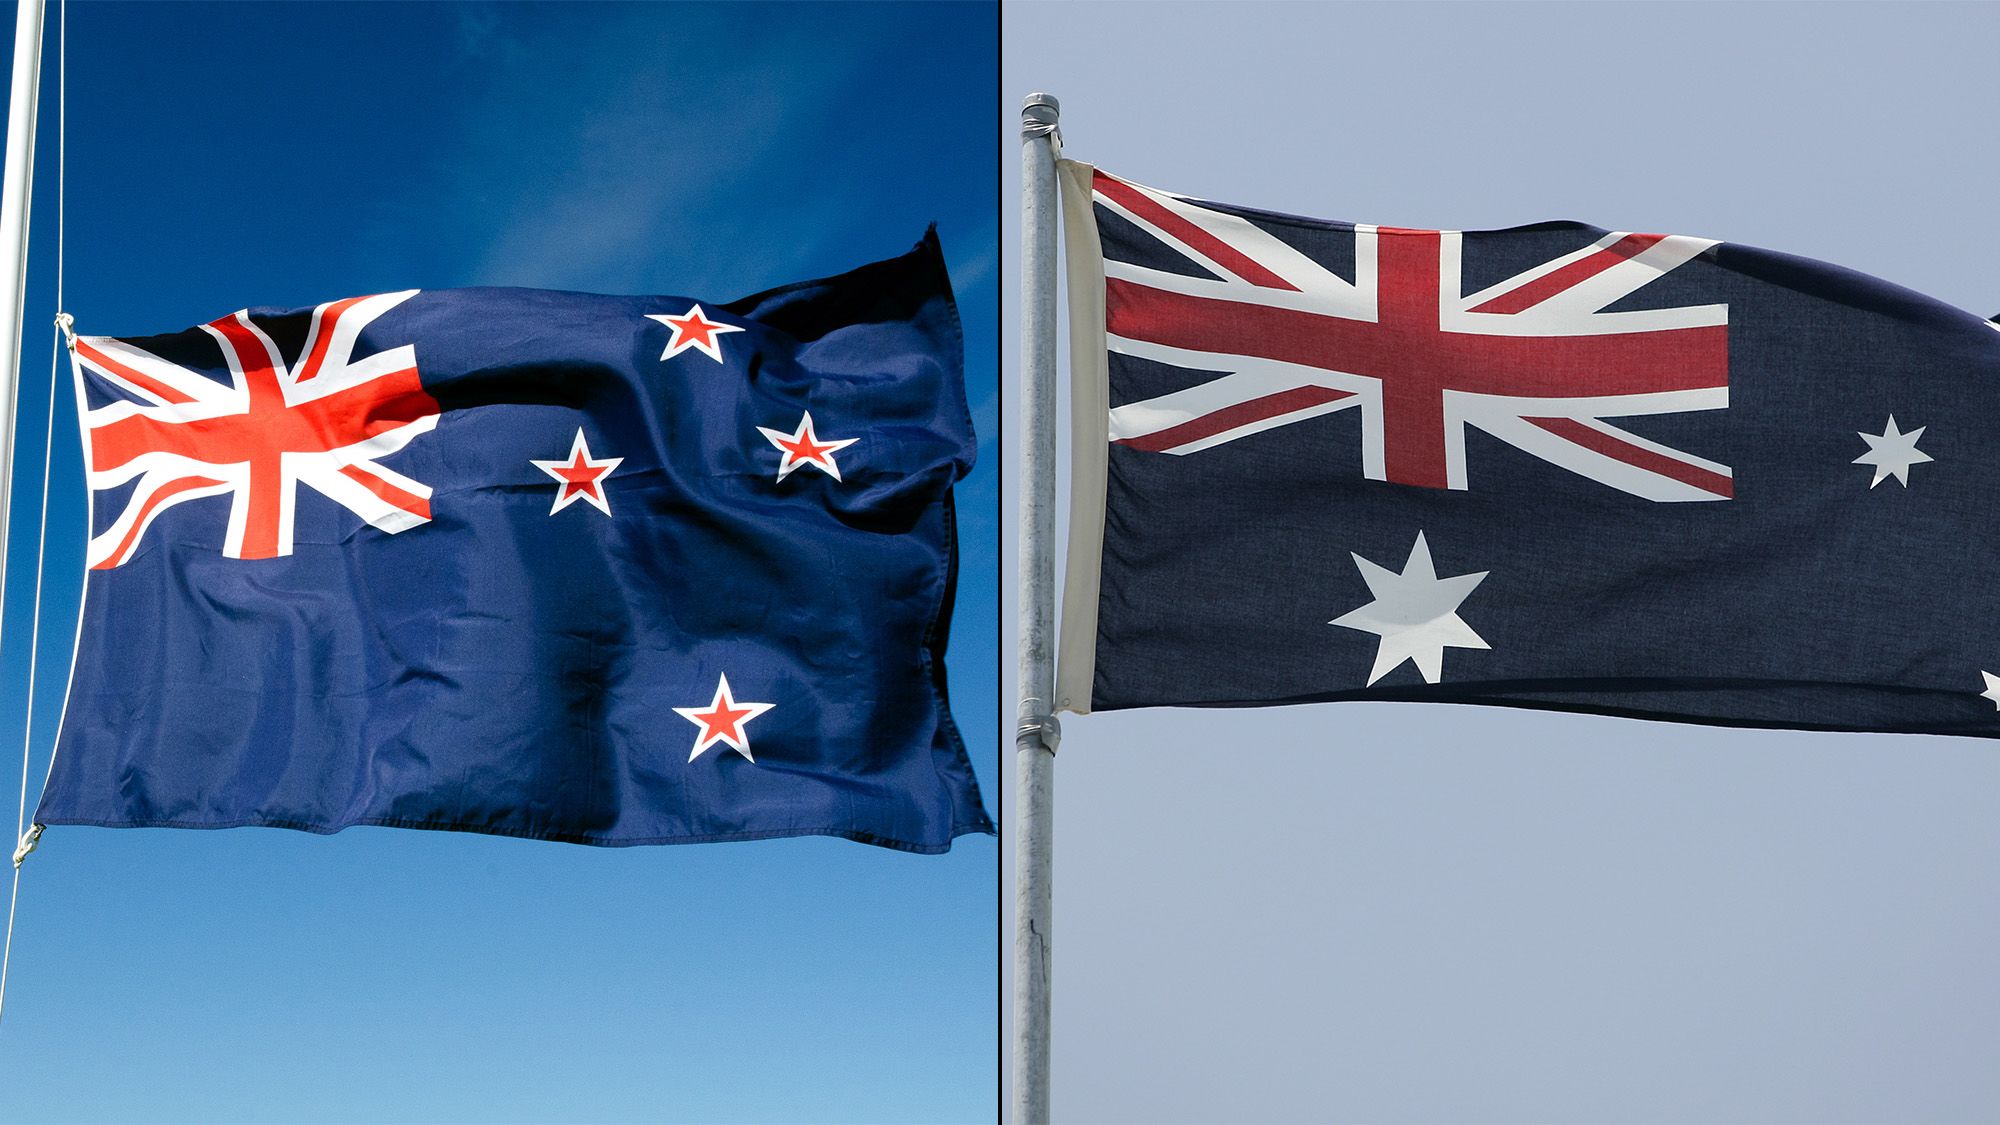 New Zealand tells Stop 'copying' our flag